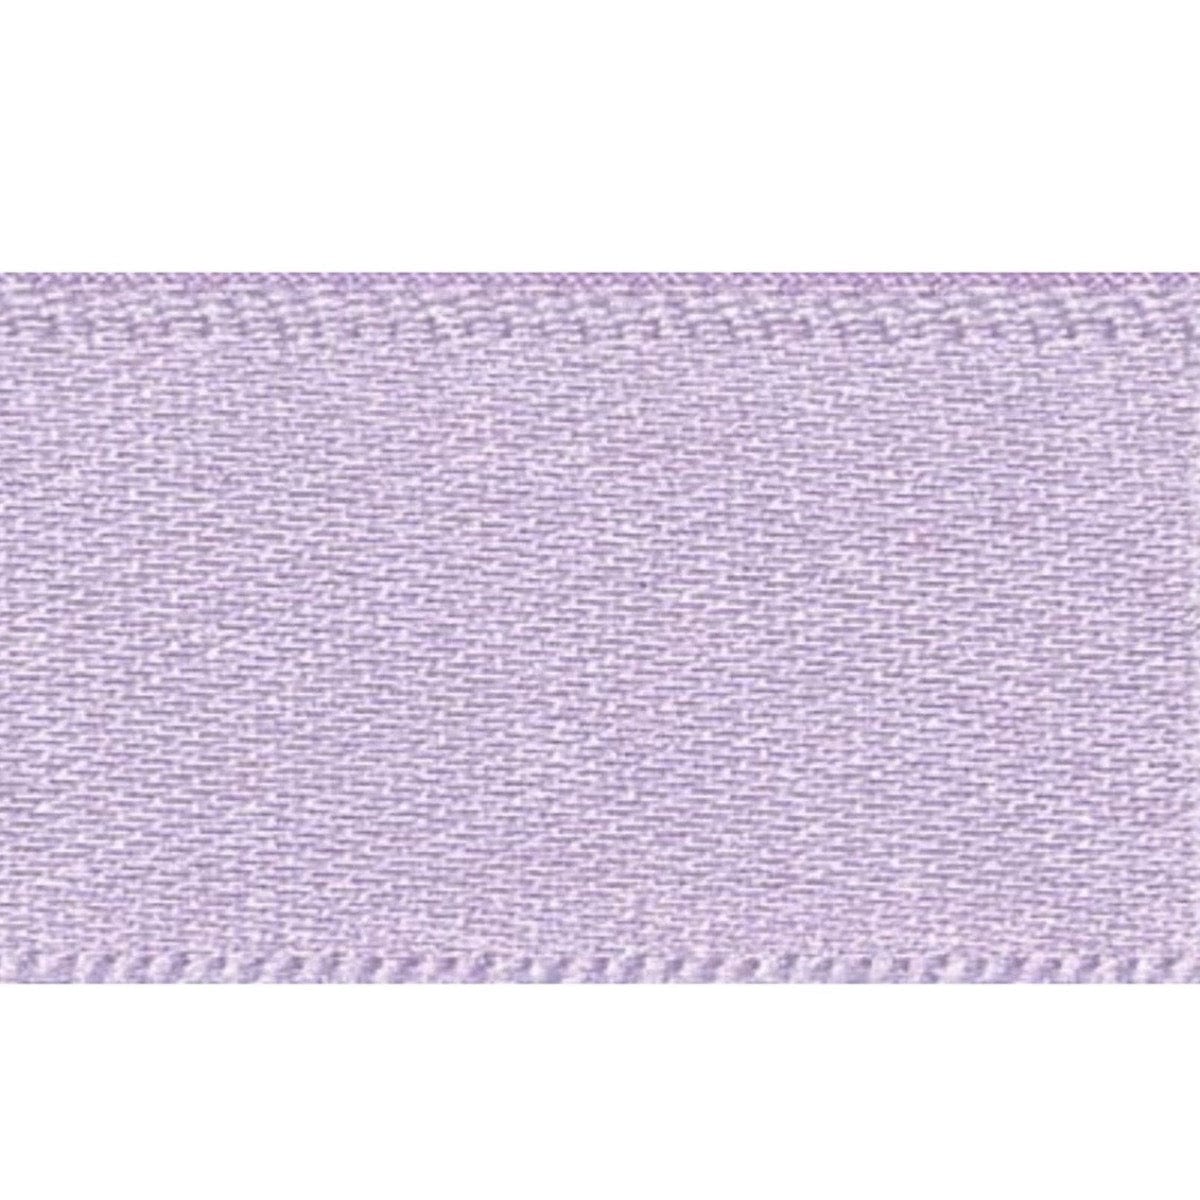 Double Faced Satin Ribbon Orchid Purple: 35mm wide. Price per metre.